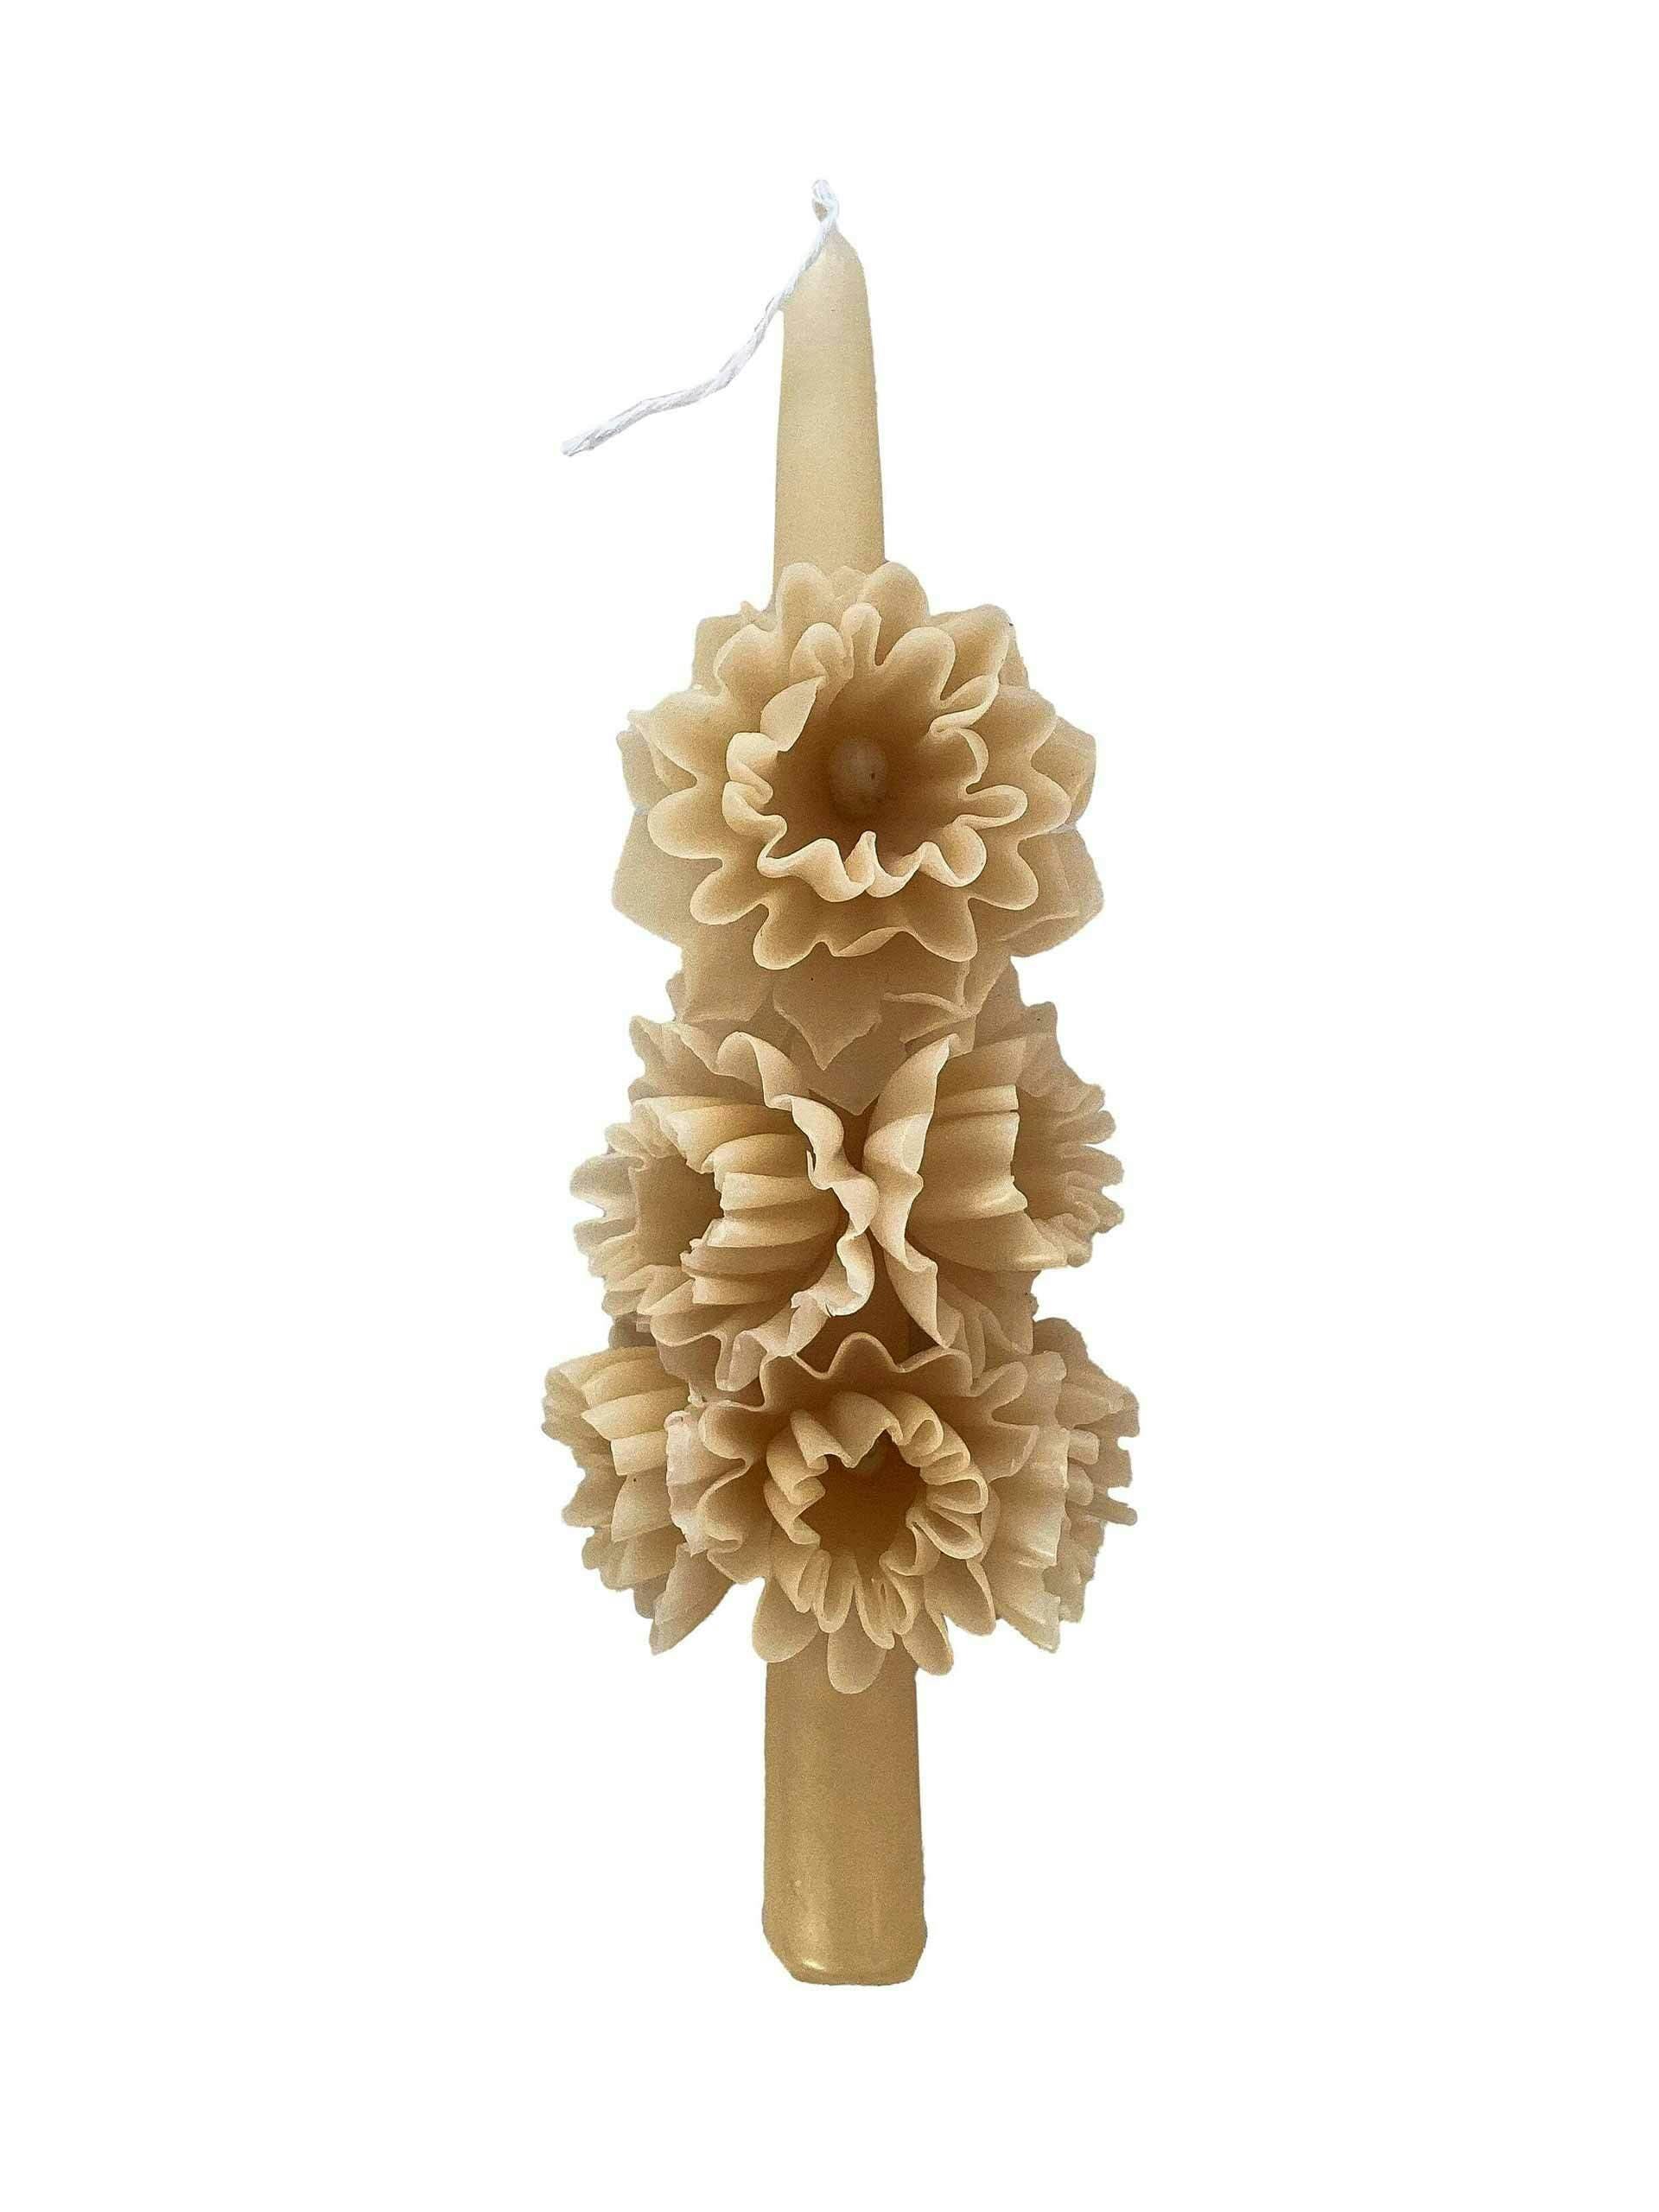 Floral candle in cream